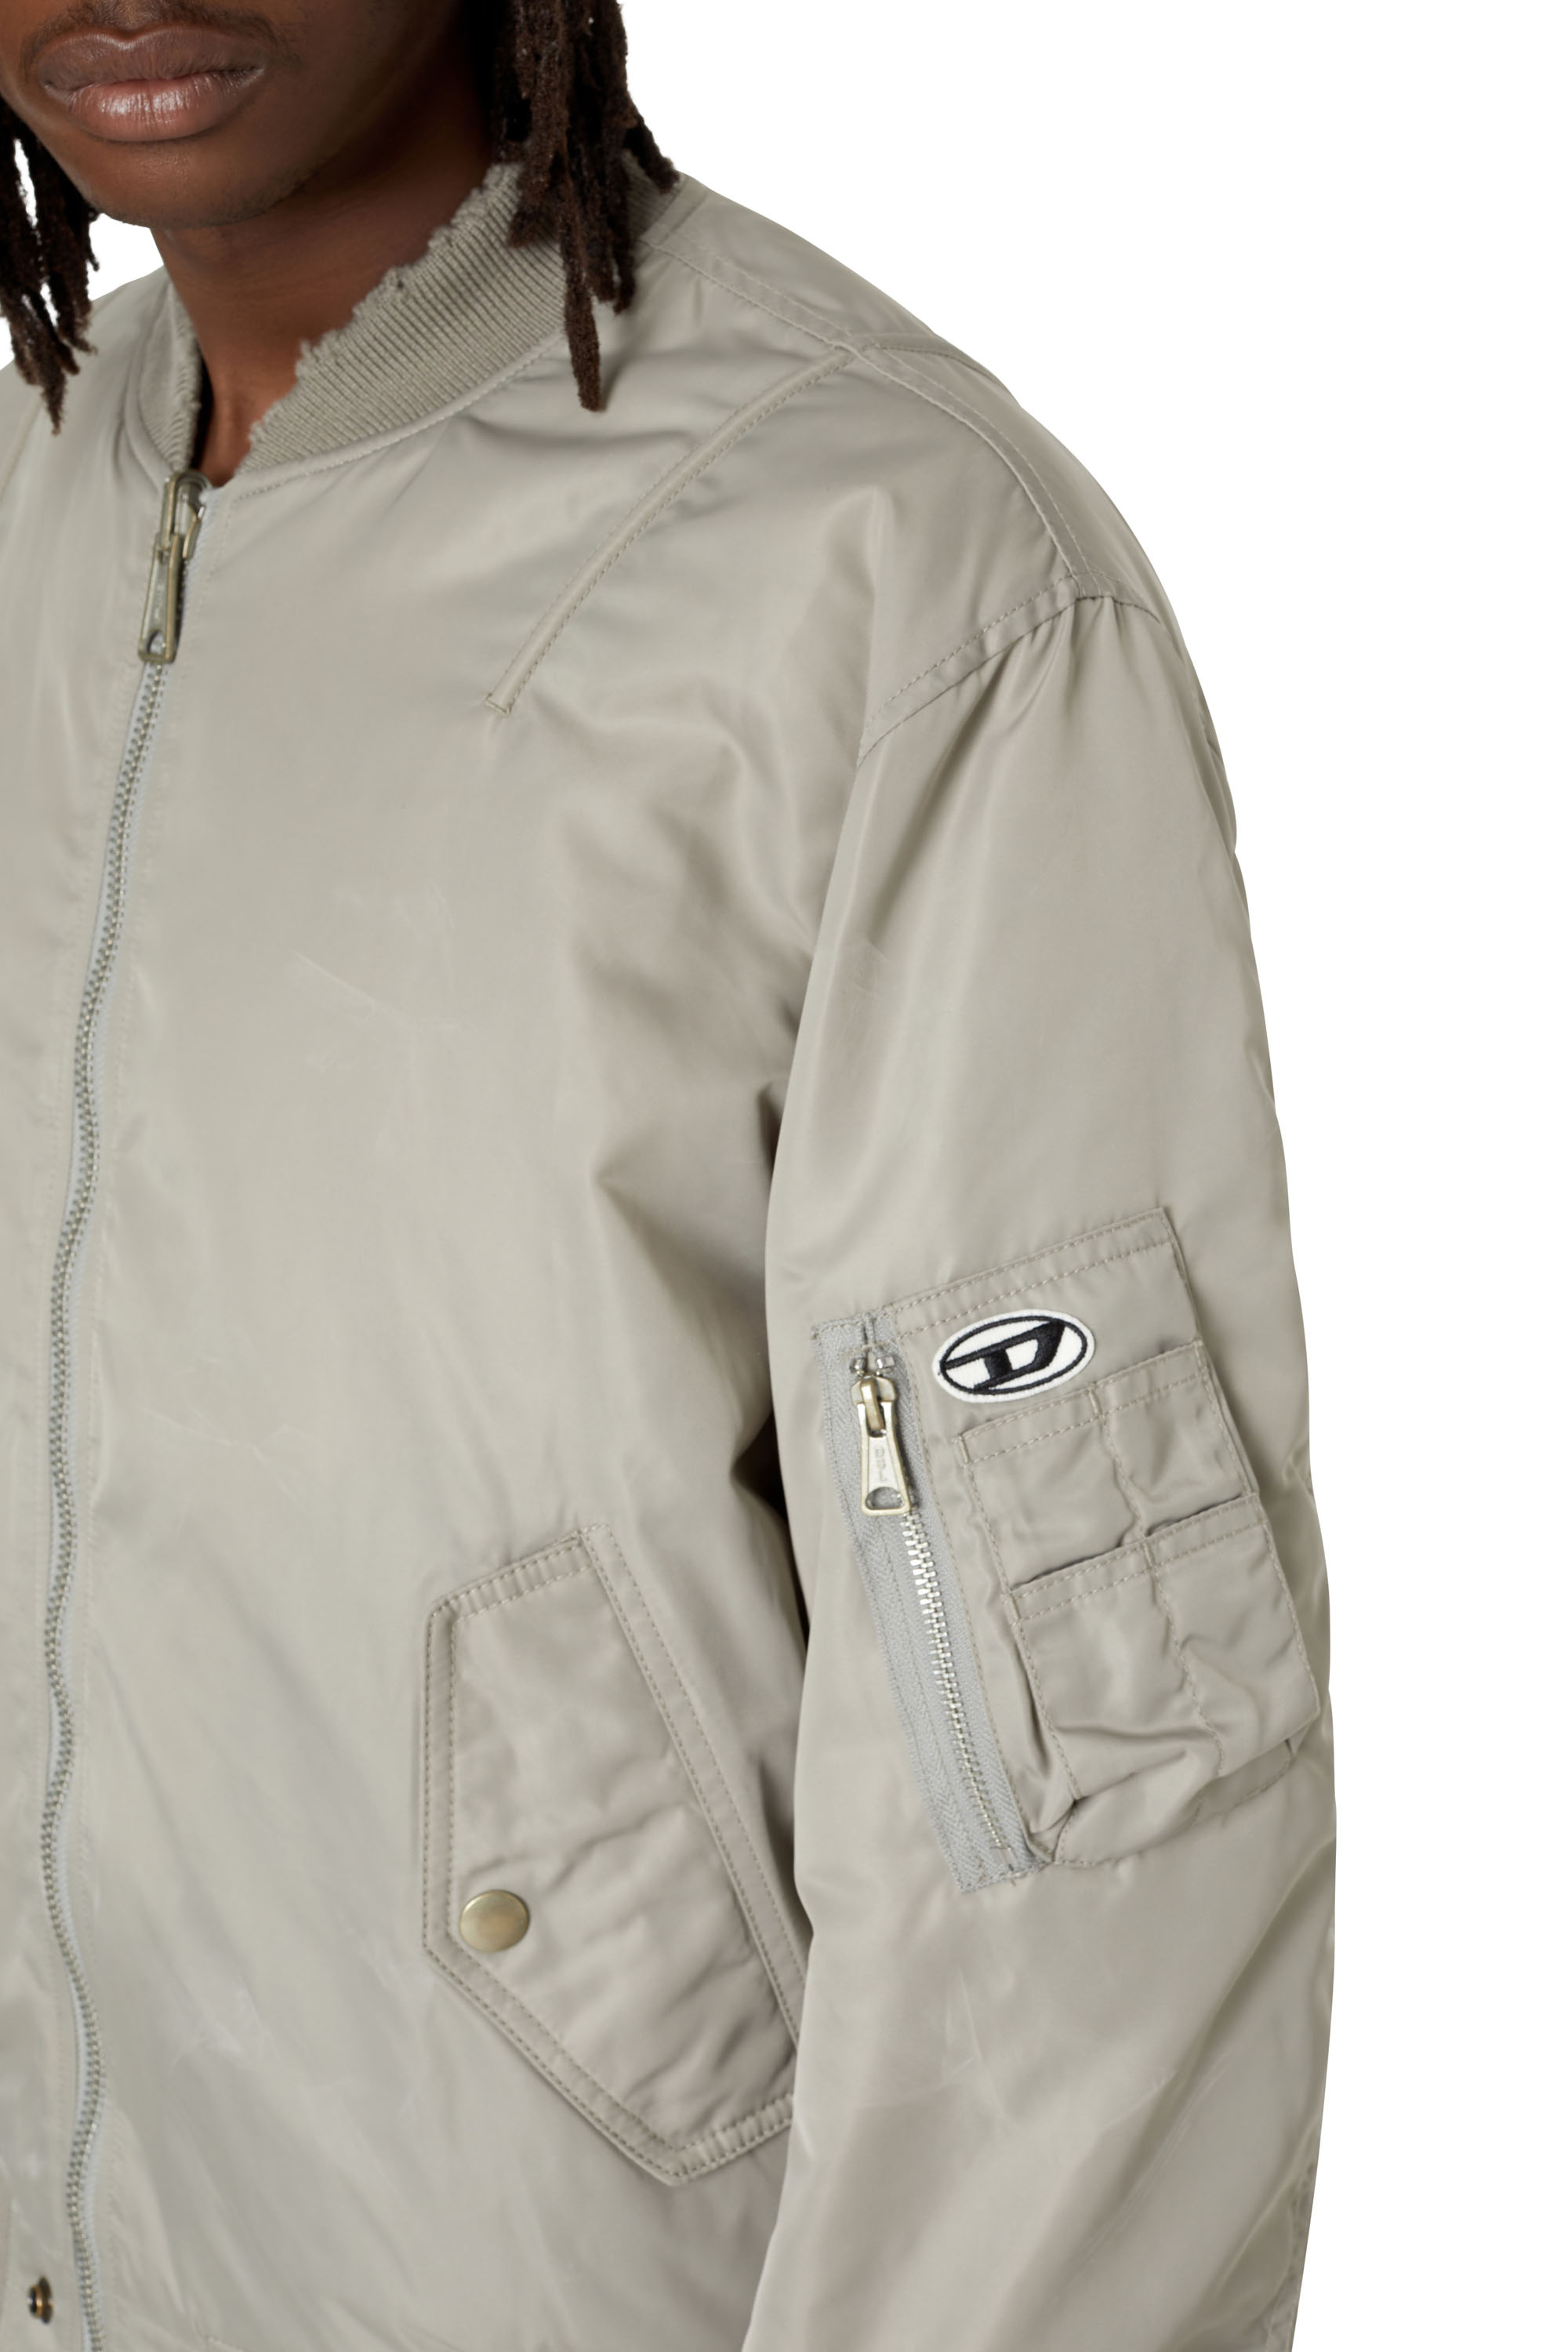 Diesel - J-FIGHTERS-NW, Gris oscuro - Image 3